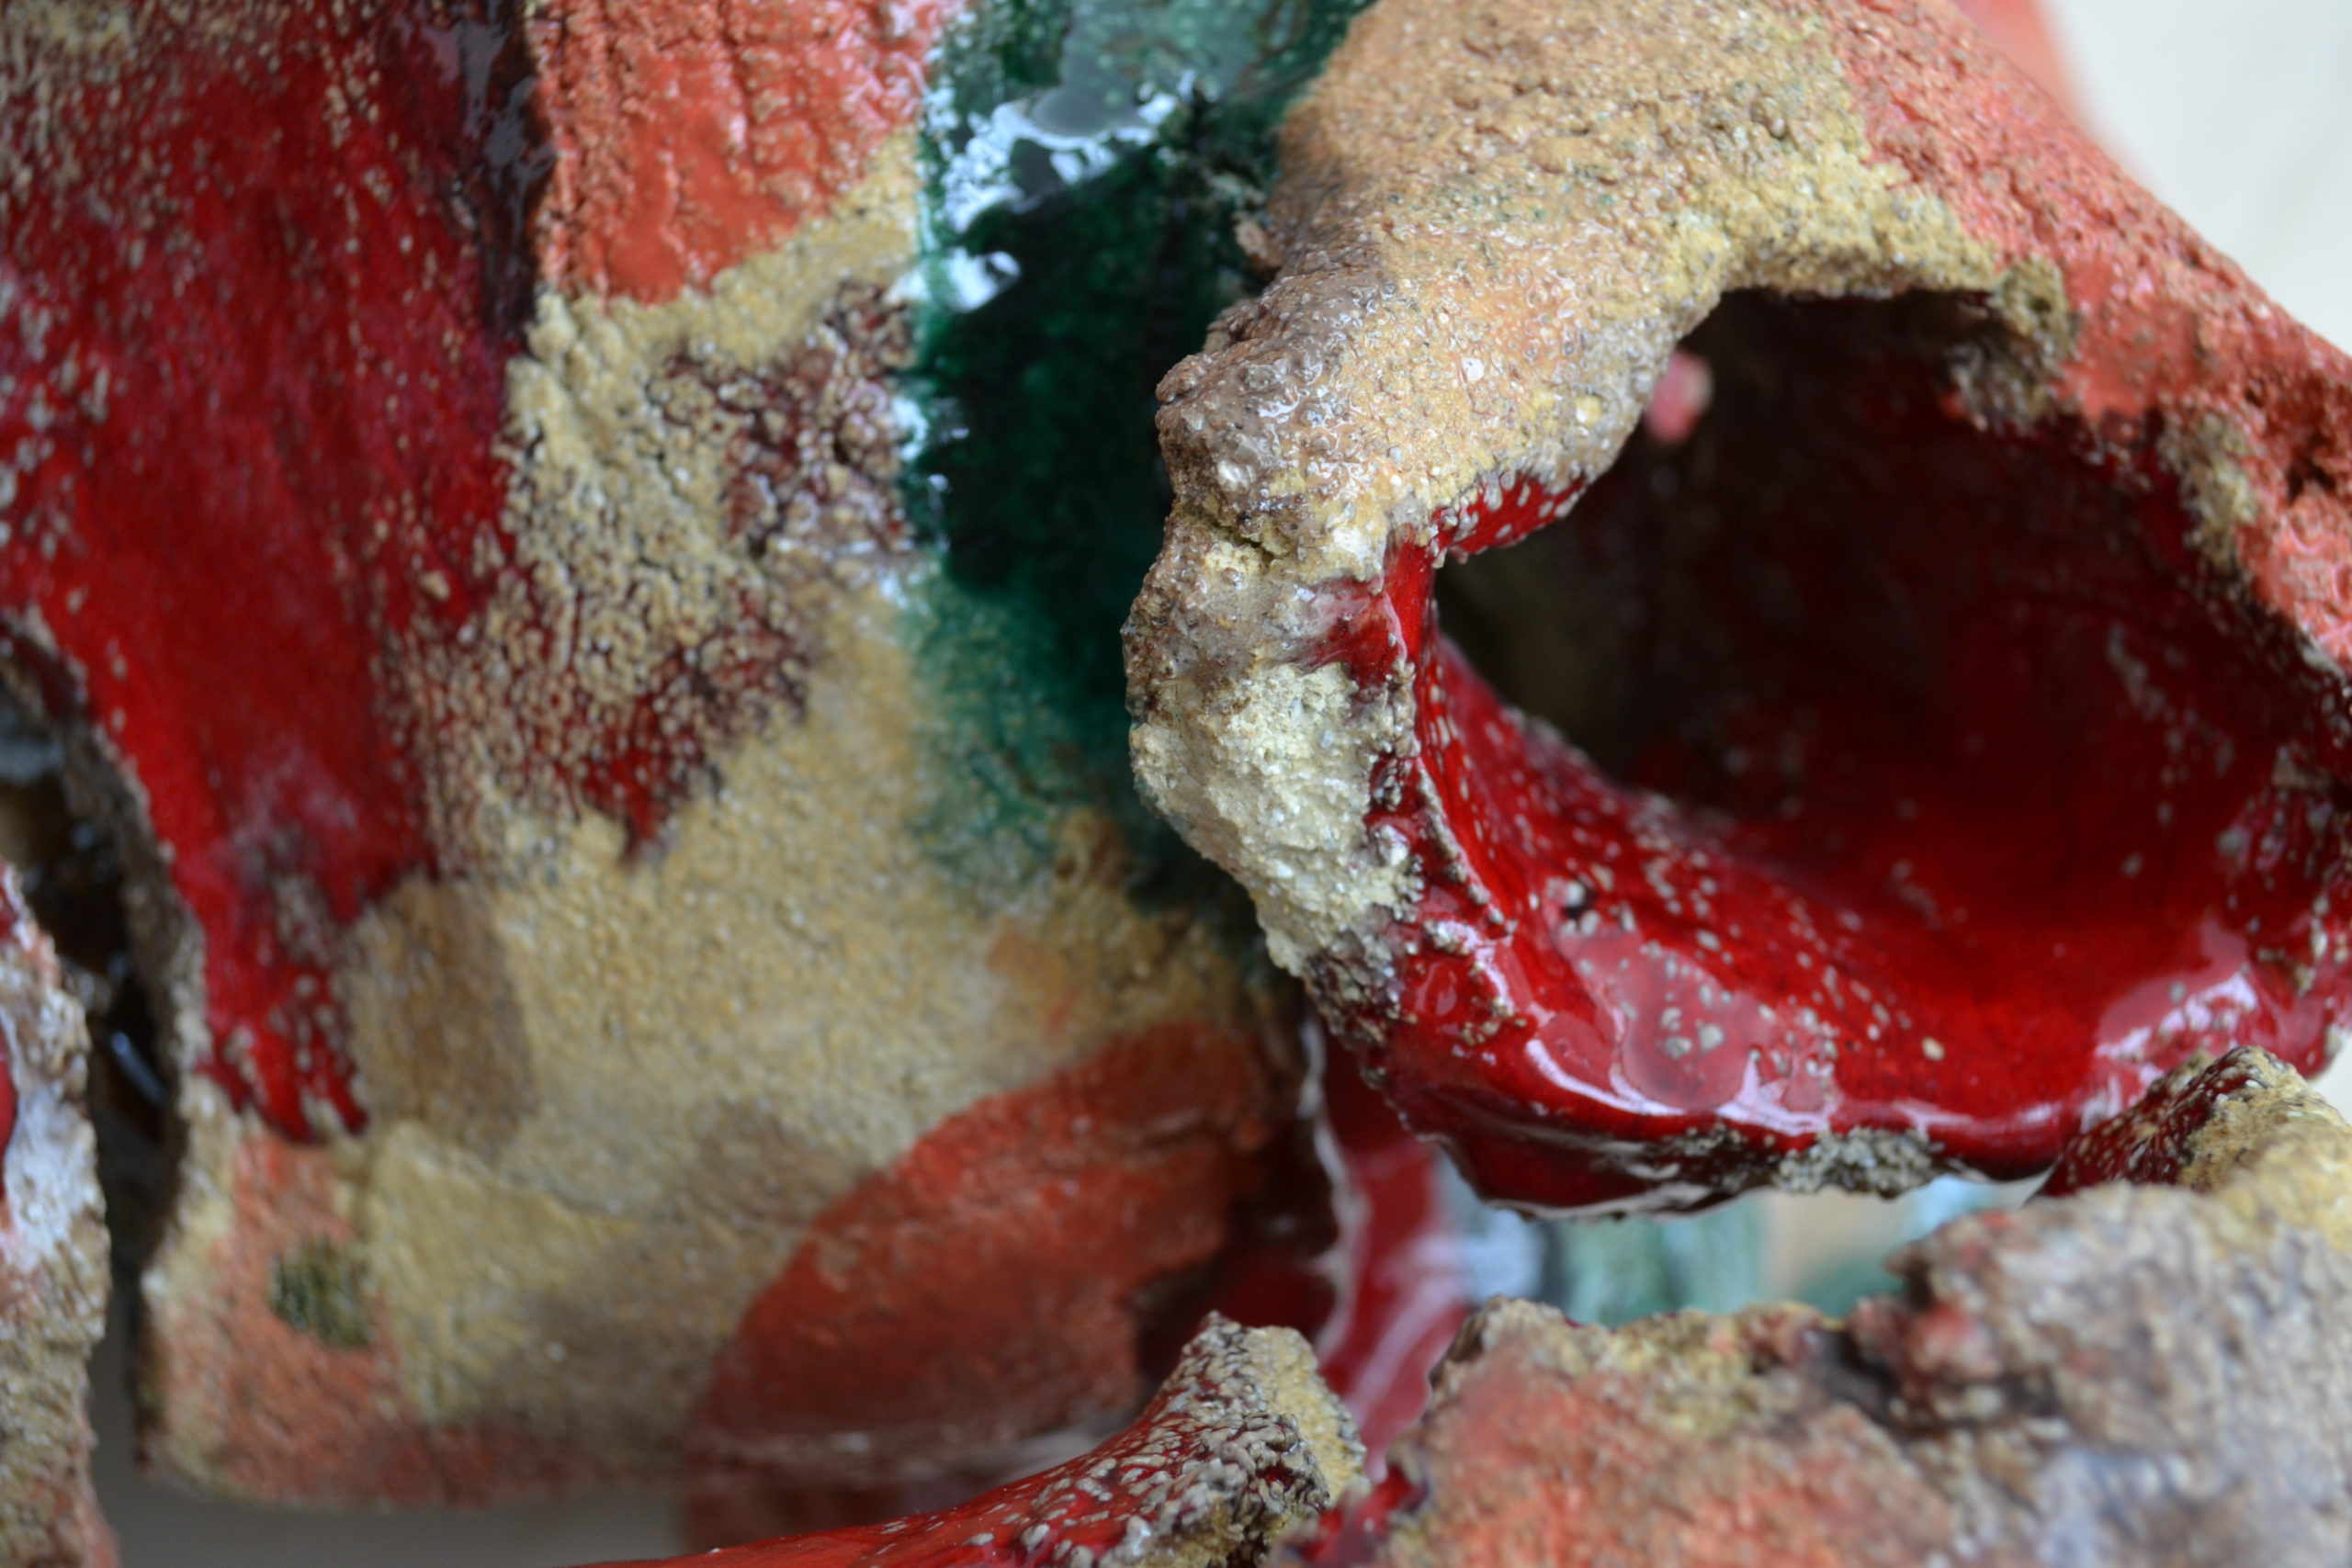 Detail of the sculpture "Corps Paysage #4" by Barbara Bauer artist, showing the glazes in red and green of the ceramic sculpture